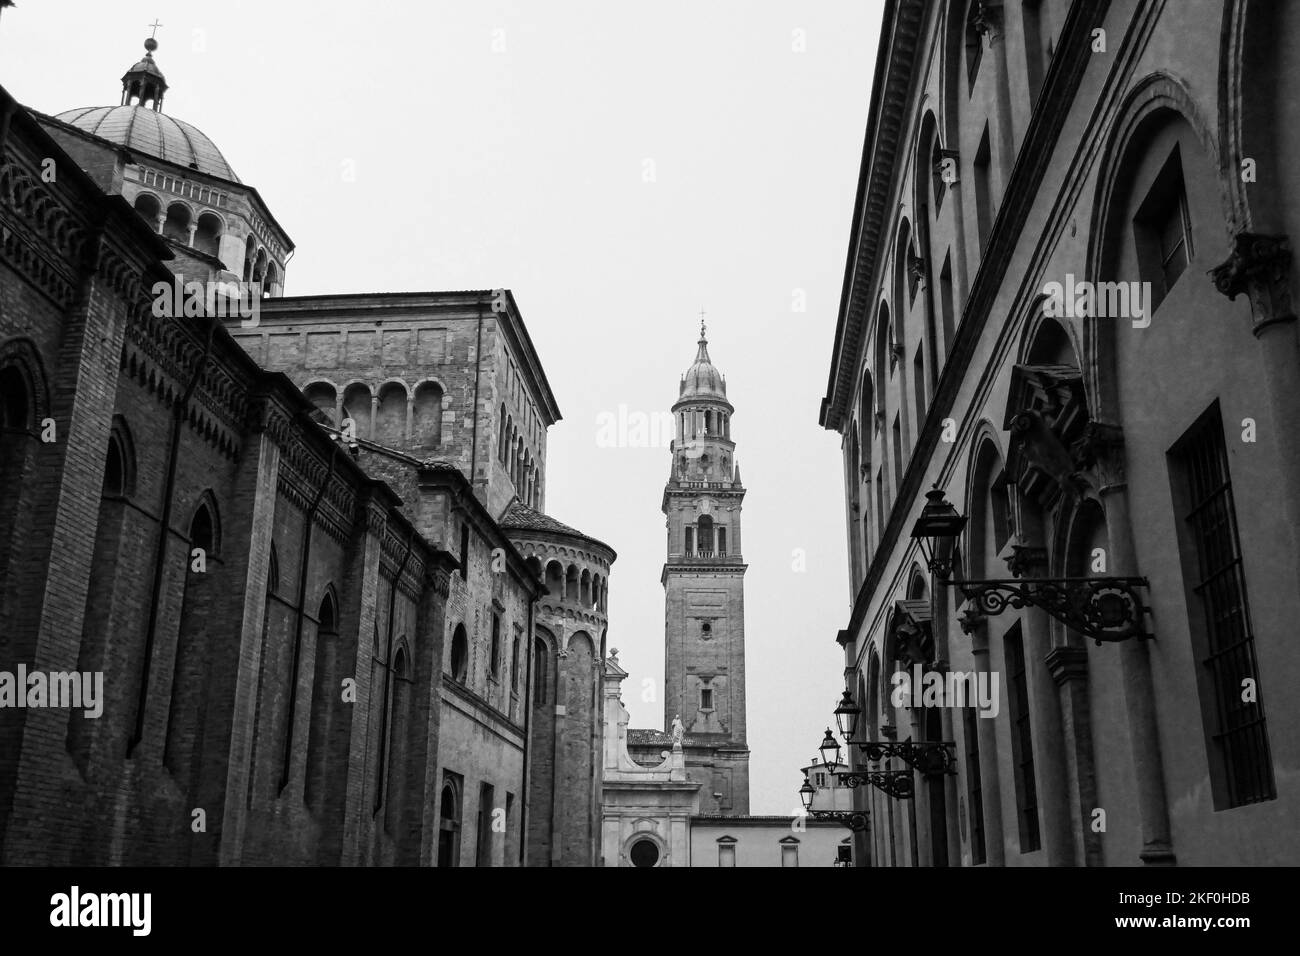 The Monastery and Church of San Giovanni Evangelista, Parma, Italy, in black and white Stock Photo